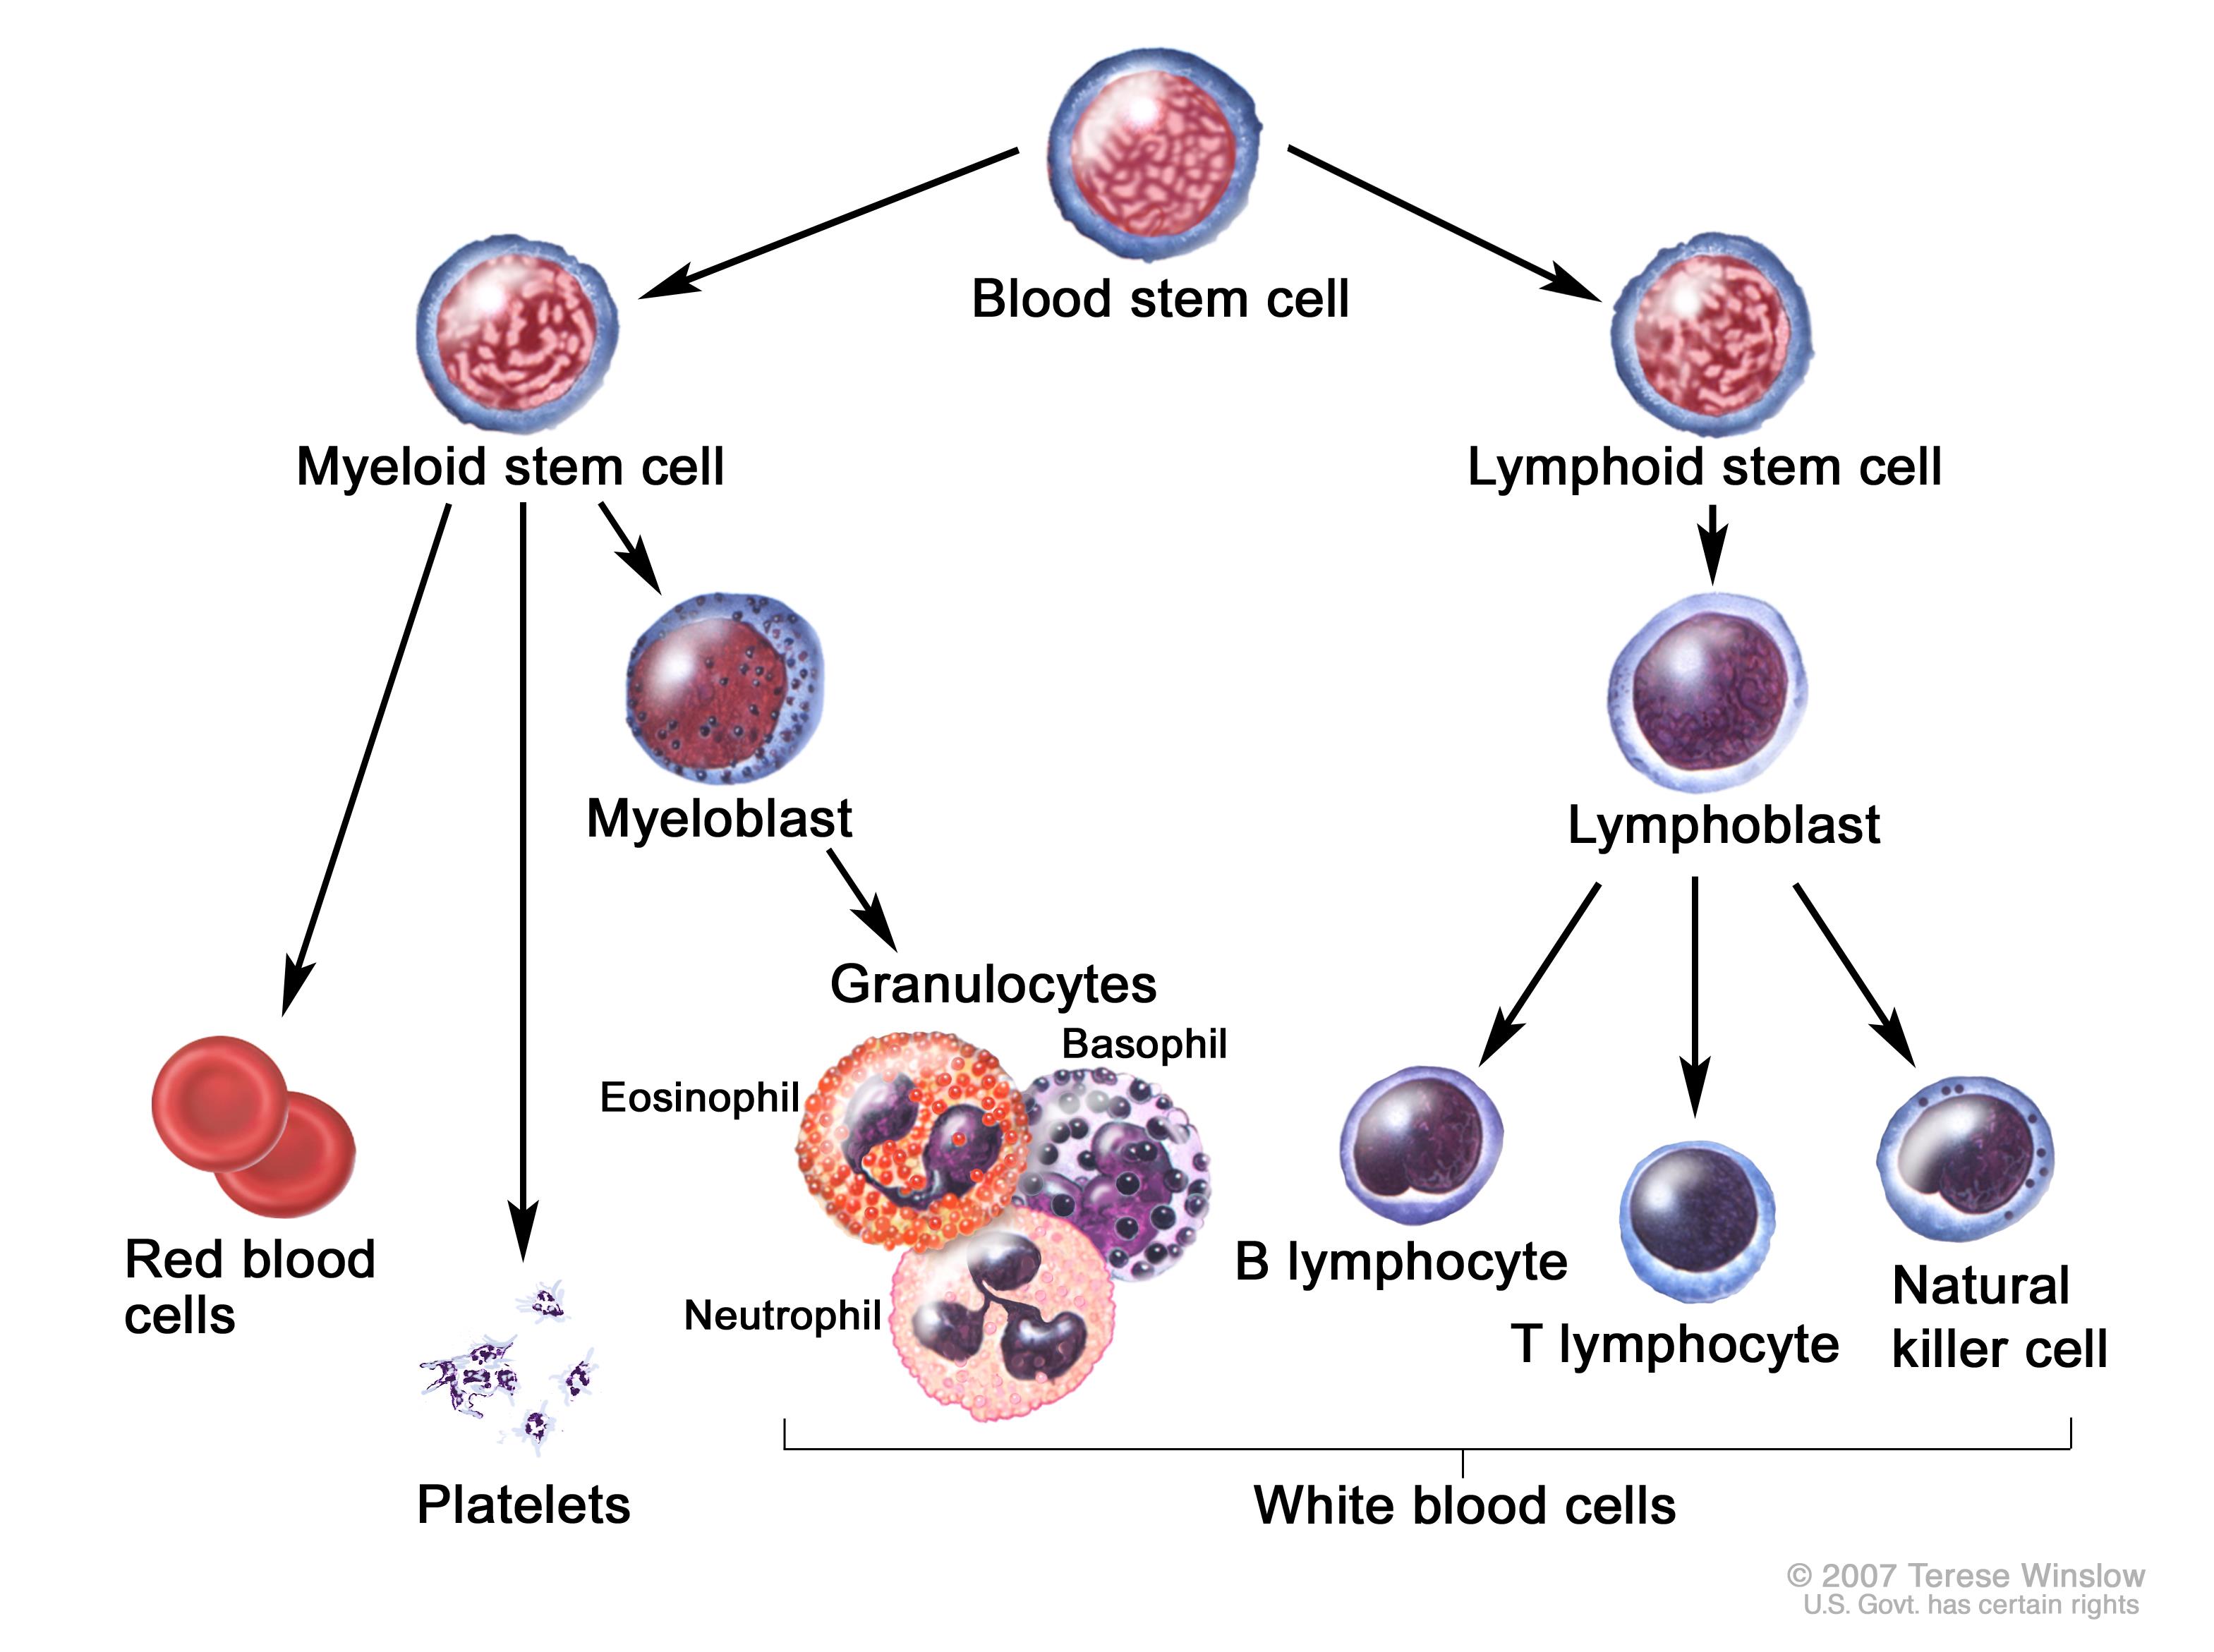 Blood cell lineages (source)